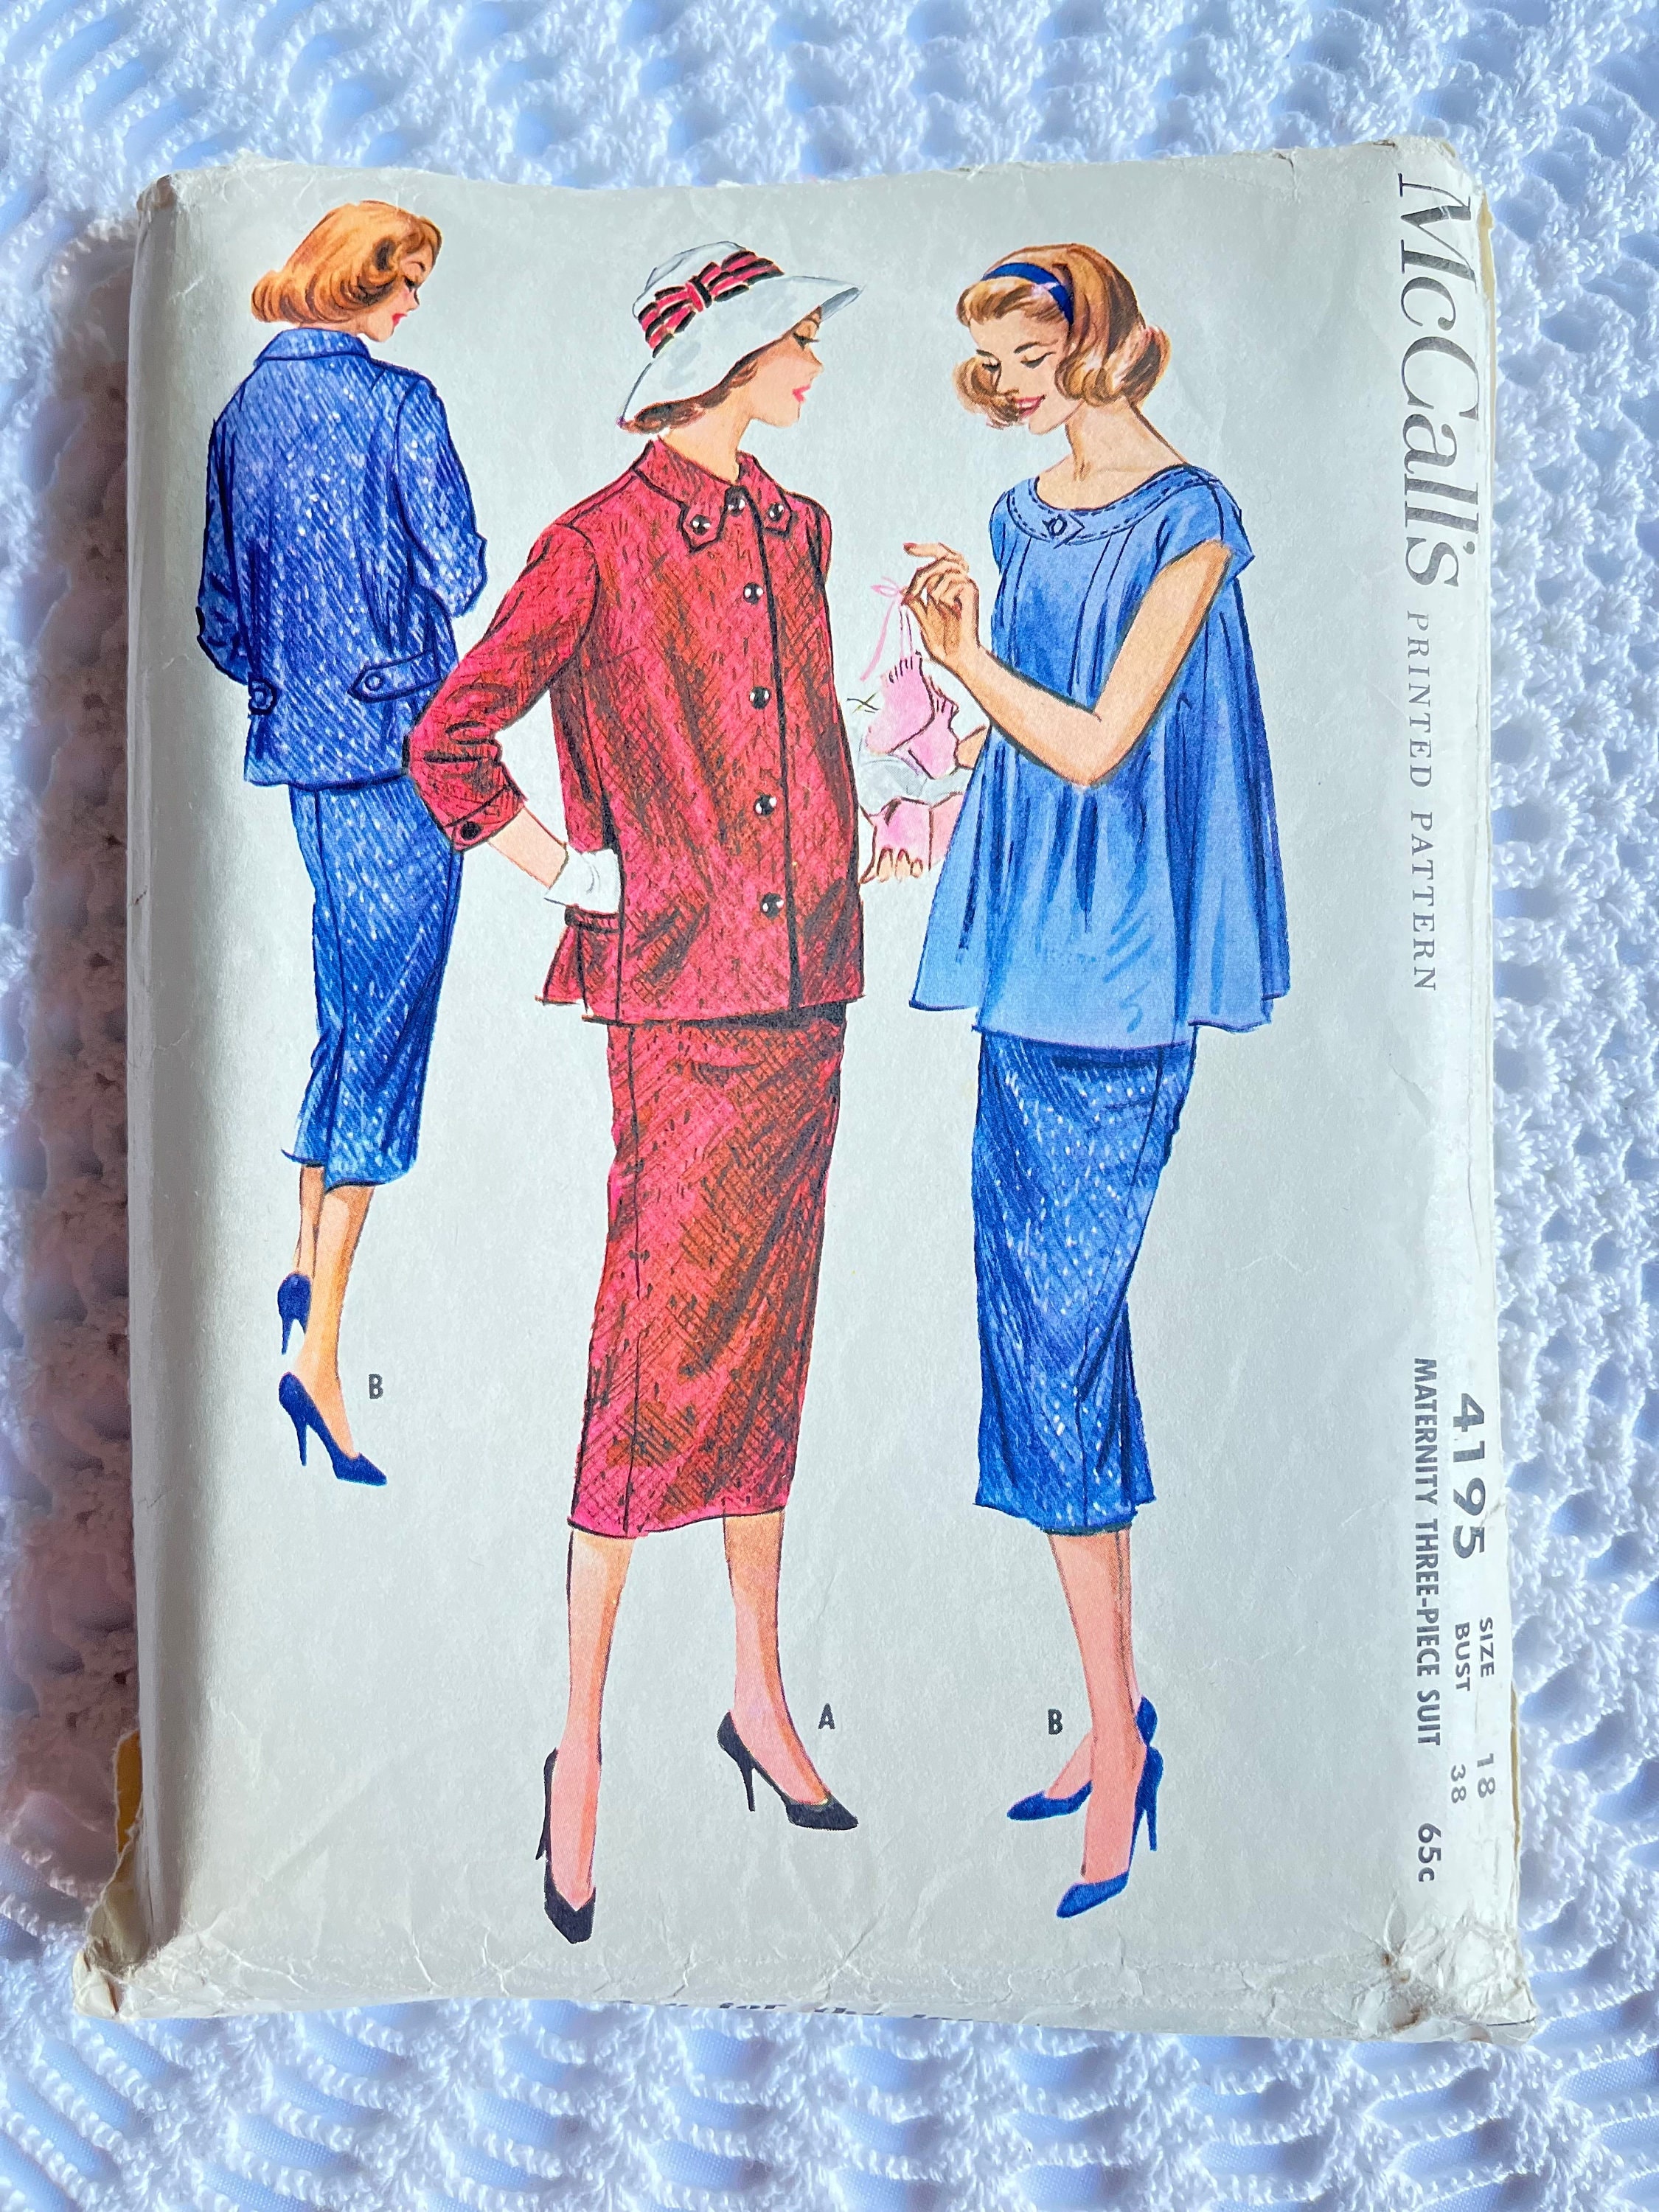 Vintage Sewing Pattern Reproduction 1950's 50's Playsuits Sleeveless Coat  Multiple Sizes Bust 29 30 31 32 33 34 36 Inch INSTANT DOWNLOAD 